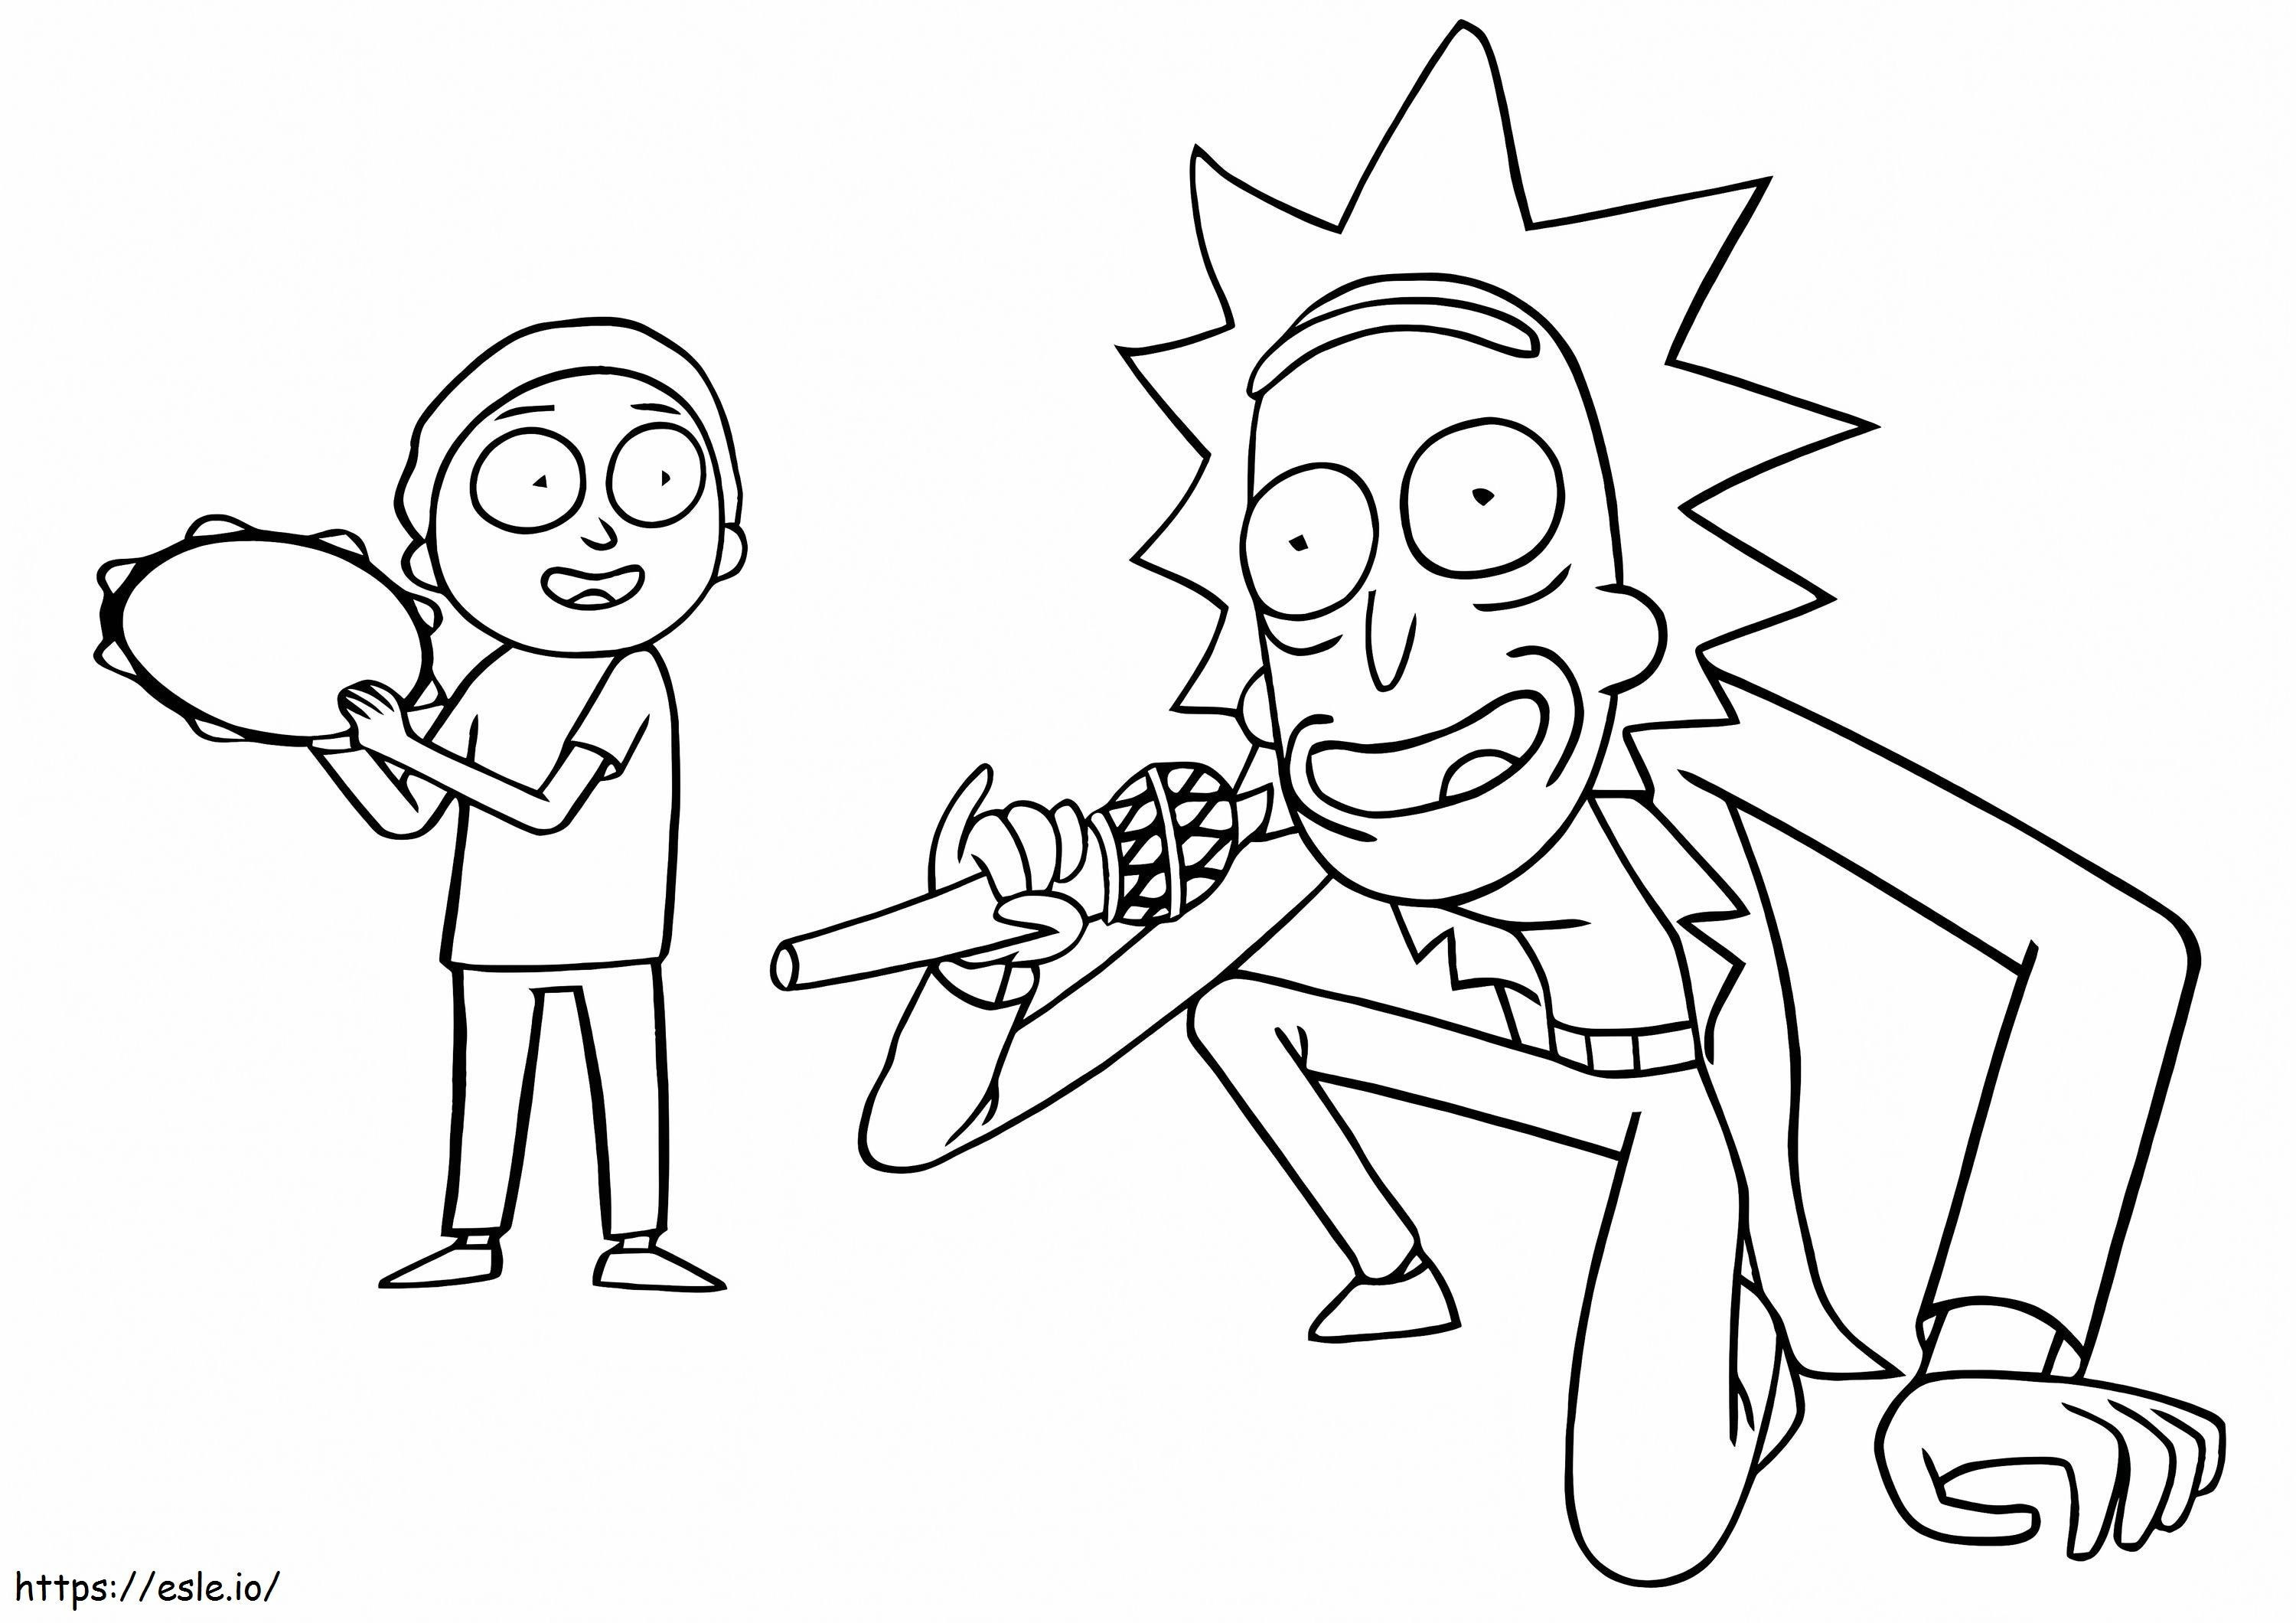 Rick Sanchez And Morty coloring page